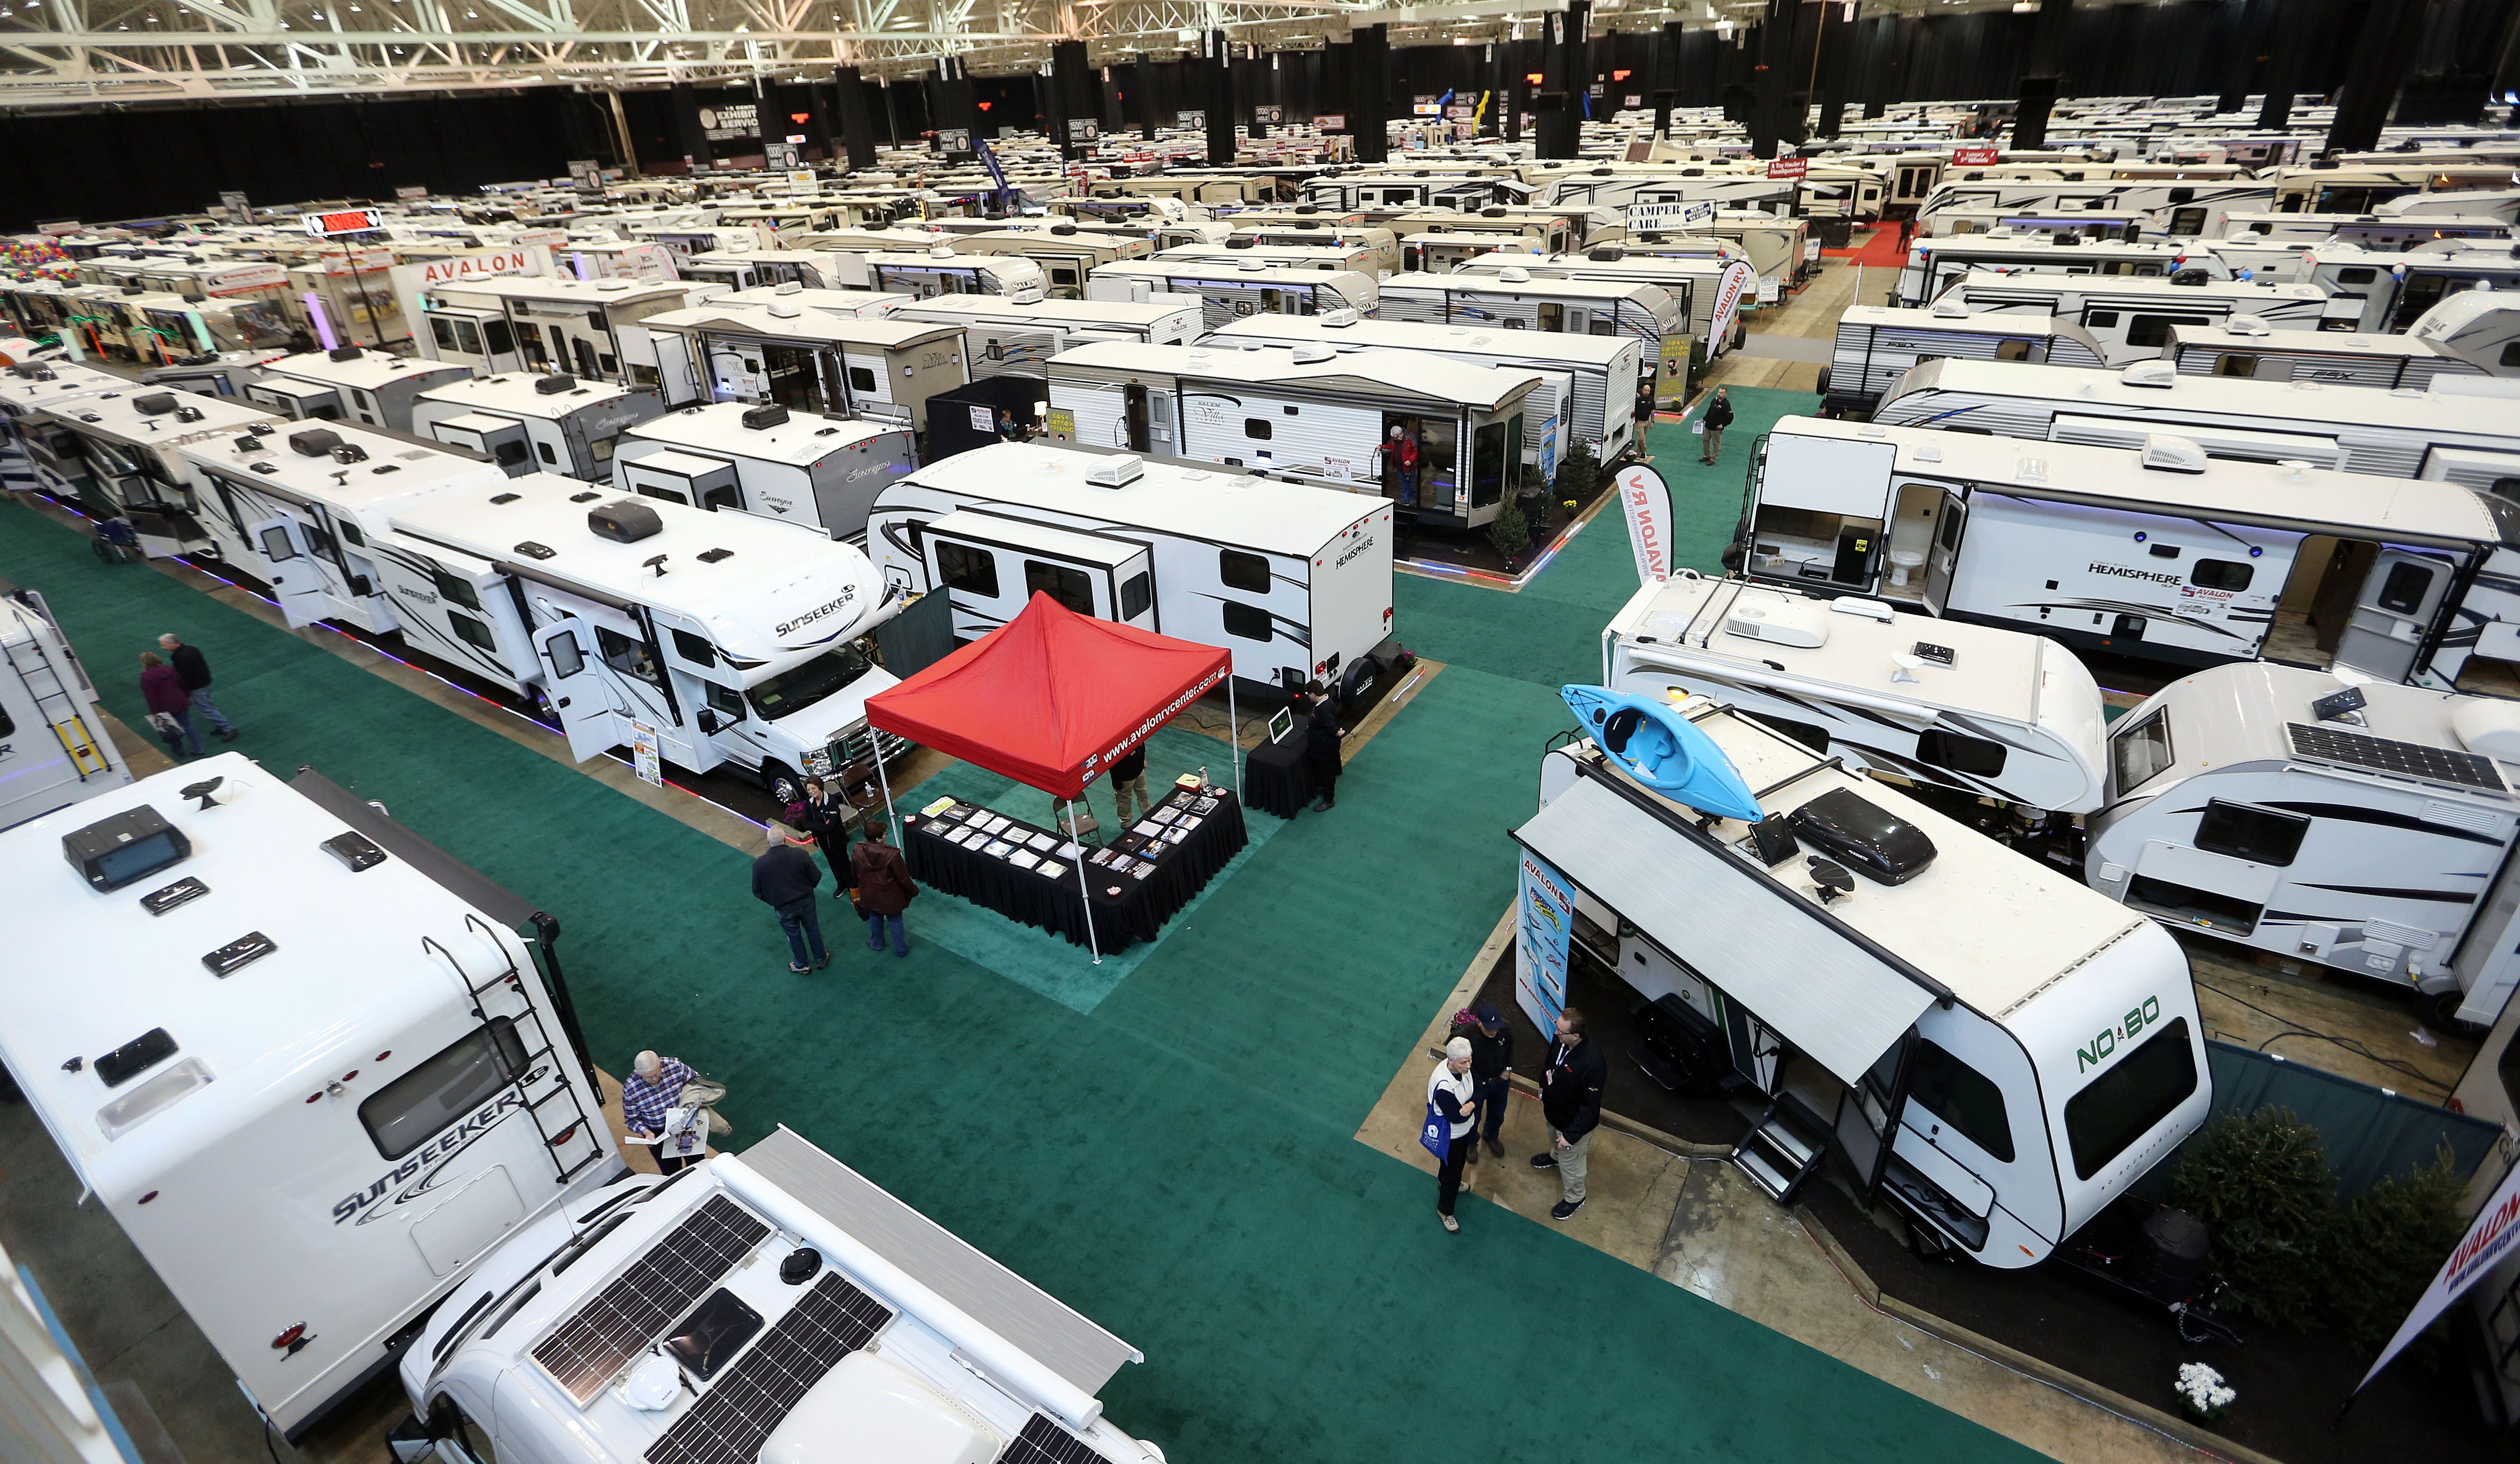 Ix Center Schedule 2022 Ohio Rv Show Cancels January Event At I-X Center, Others May Follow -  Cleveland.com